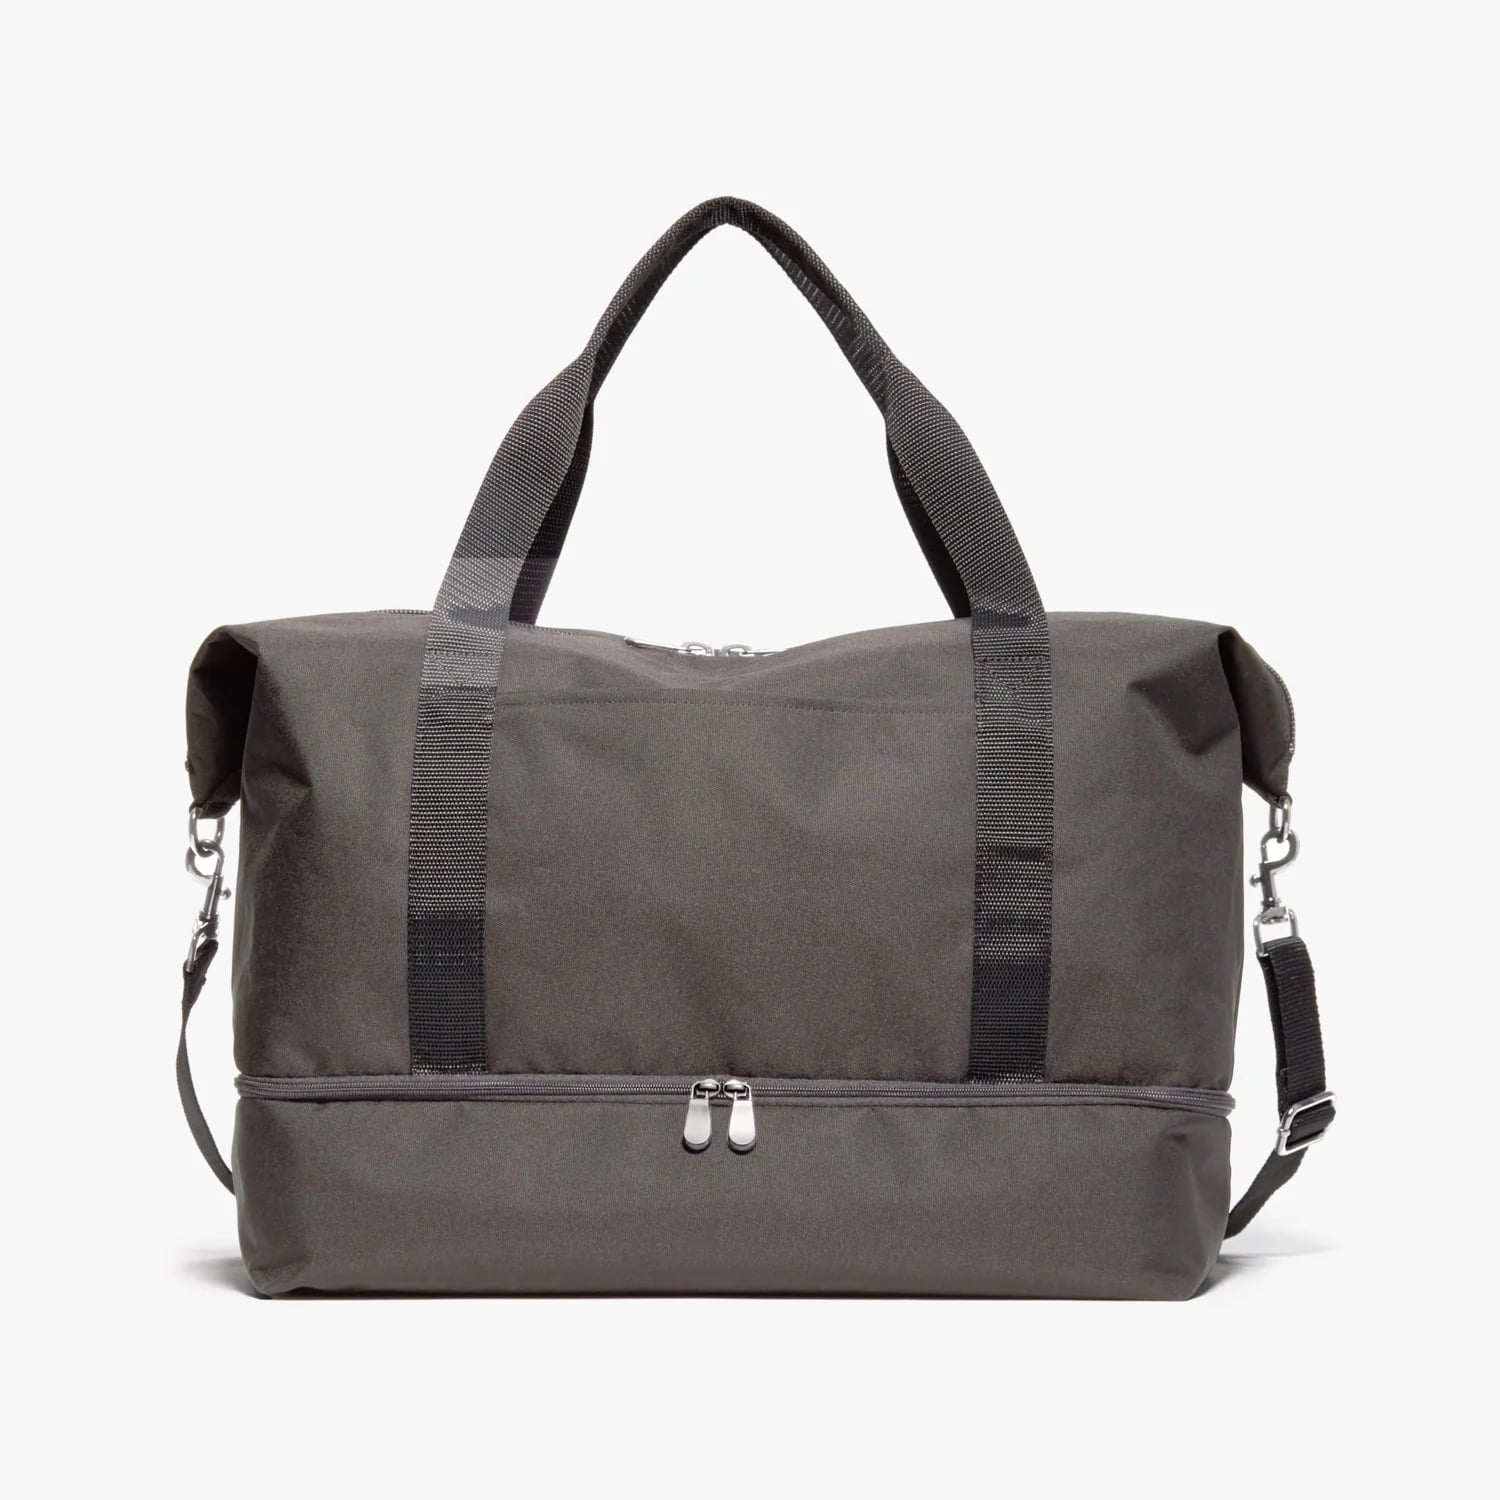 <p><a href="http://www.loandsons.com/products/catalina-deluxe-600d-recycled-poly-grey">BUY NOW</a></p><p>$215</p><p><a href="http://www.loandsons.com/products/catalina-deluxe-600d-recycled-poly-grey" class="ga-track"><strong>Lo & Sons Catalina Deluxe</strong></a> ($215) </p> <p>For the parent who wants to have a stylish travel bag but is also eco-conscious, this bag melds those two wishes together. Made of canvas designed from recycled plastic bottles and eco-friendly canvas, this gorgeous bag comes in several different colors and is designed with smart pockets (like the one on the bottom that's perfect for your shoes).</p> <p><strong>What reviewers say: "</strong>Beautiful bag, exactly as described and pictured. It's the perfect size, sturdy, well made. High end product at a reasonable cost. Replaces those clunky, awkward, heavy suitcases. Highly recommend!!! Fast delivery!! A++++ all the way."</p>